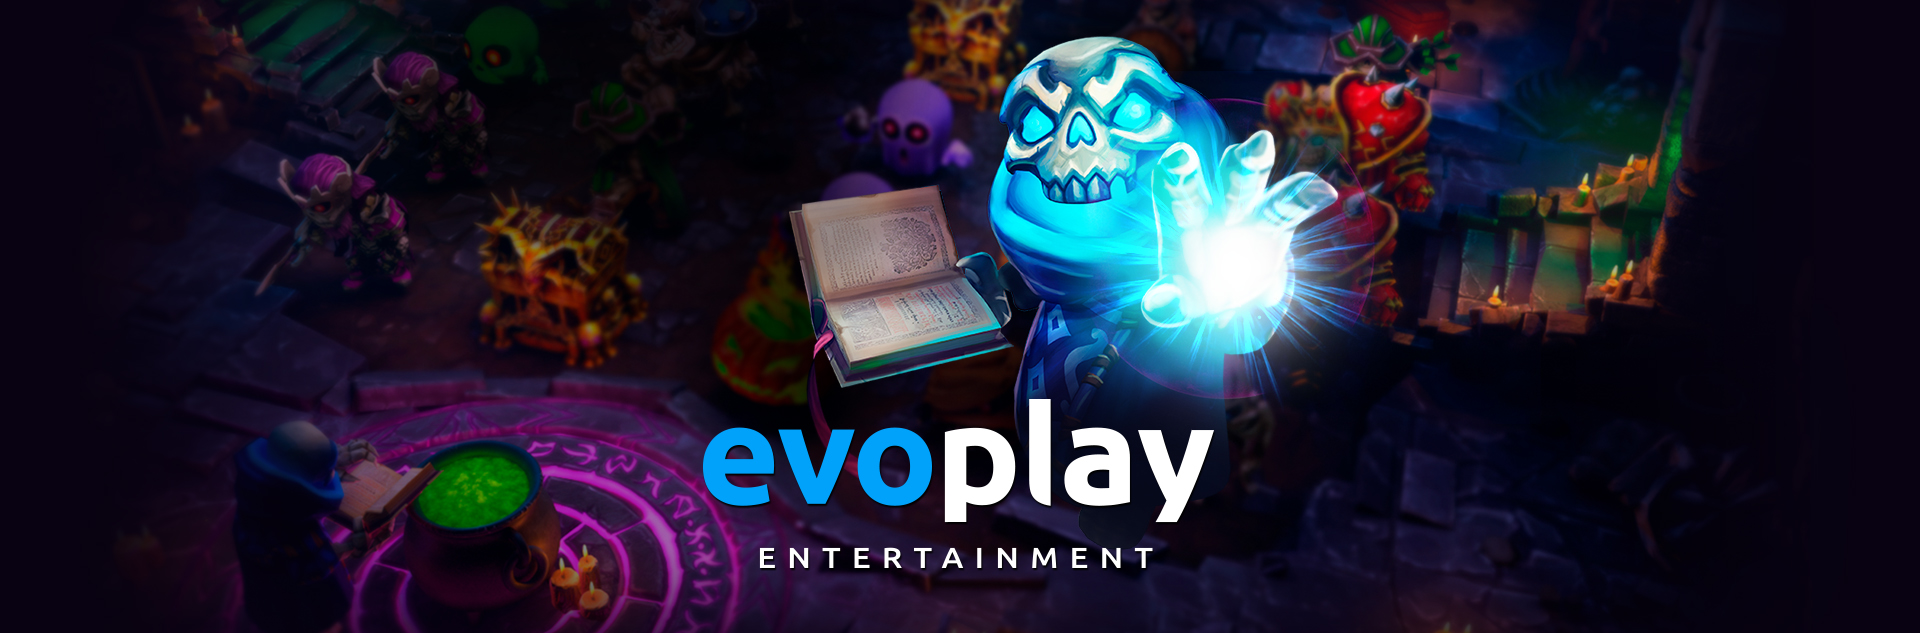 Evoplay Entertainment revamps a series of classic games